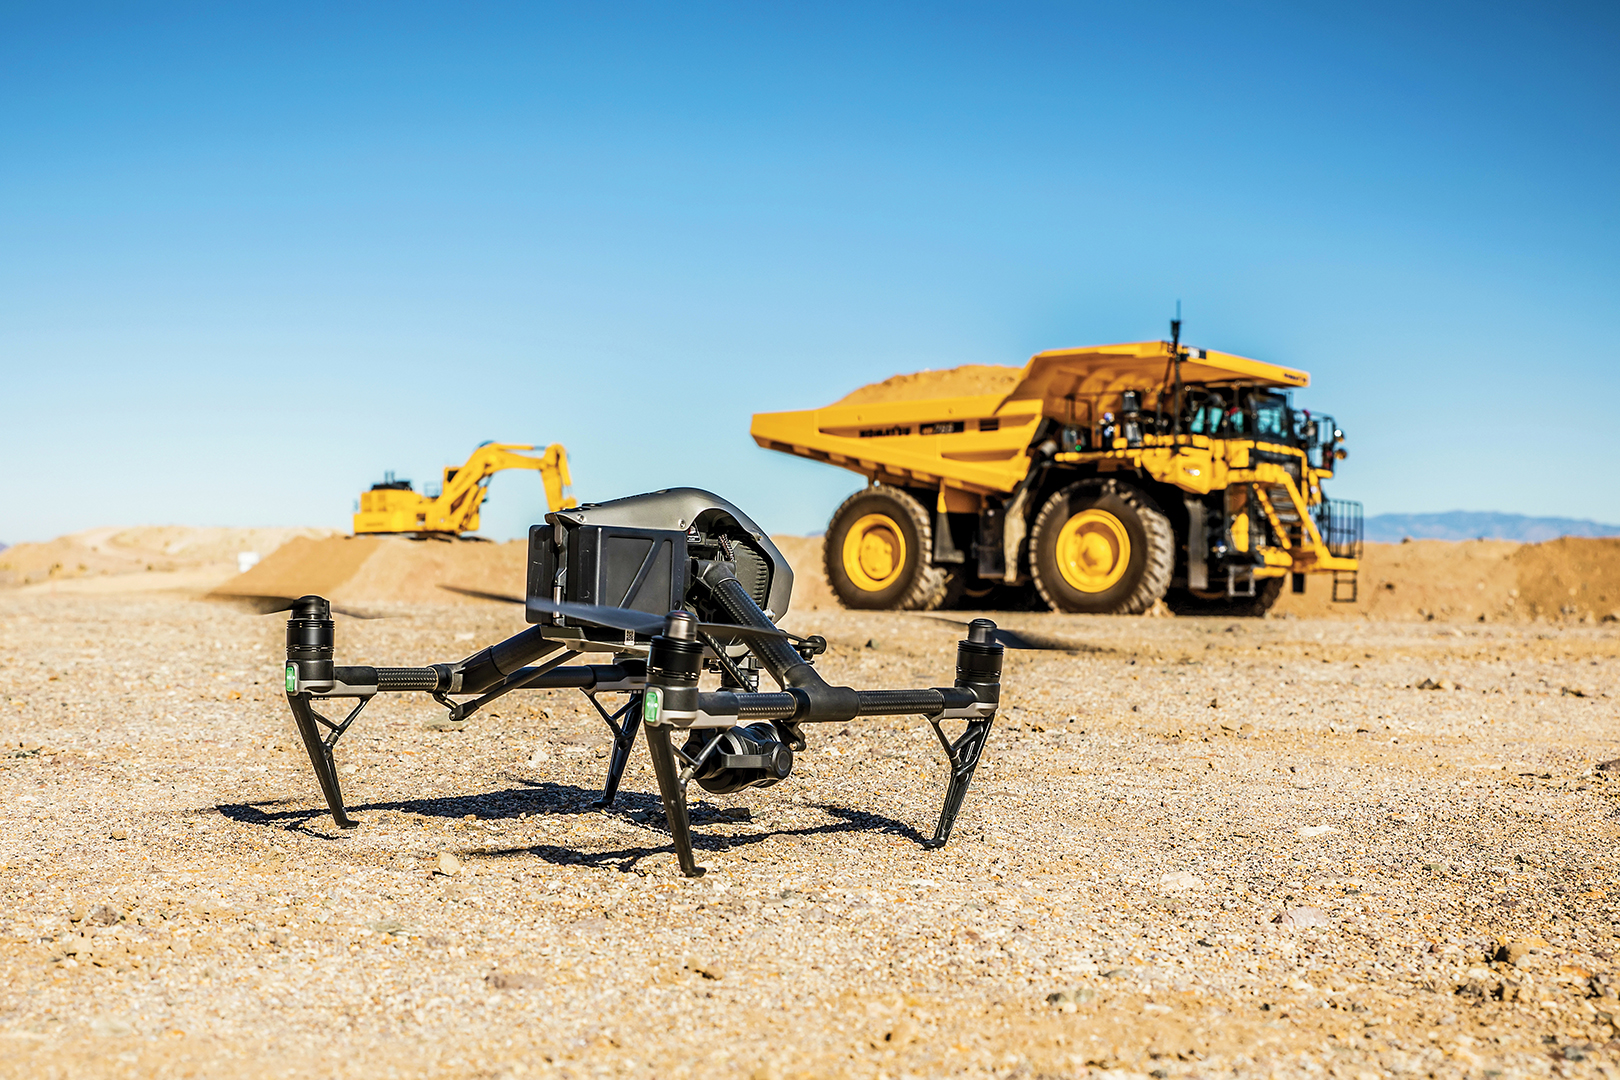 A drone sits in focus in front of an out of focus Komatsu Mining Truck and Komatsu Excavator